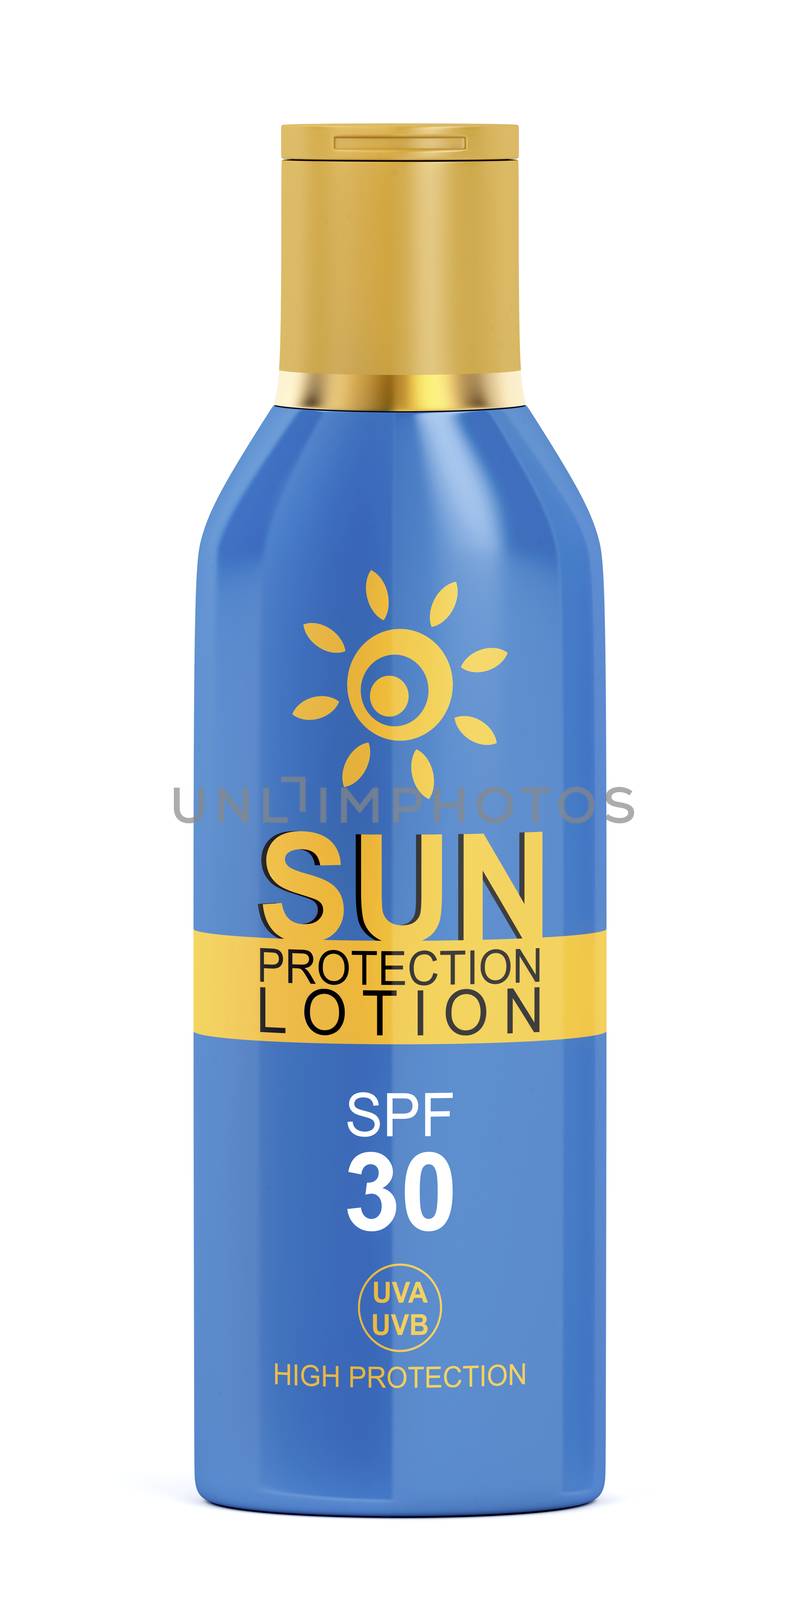 Sunscreen lotion on white background by magraphics